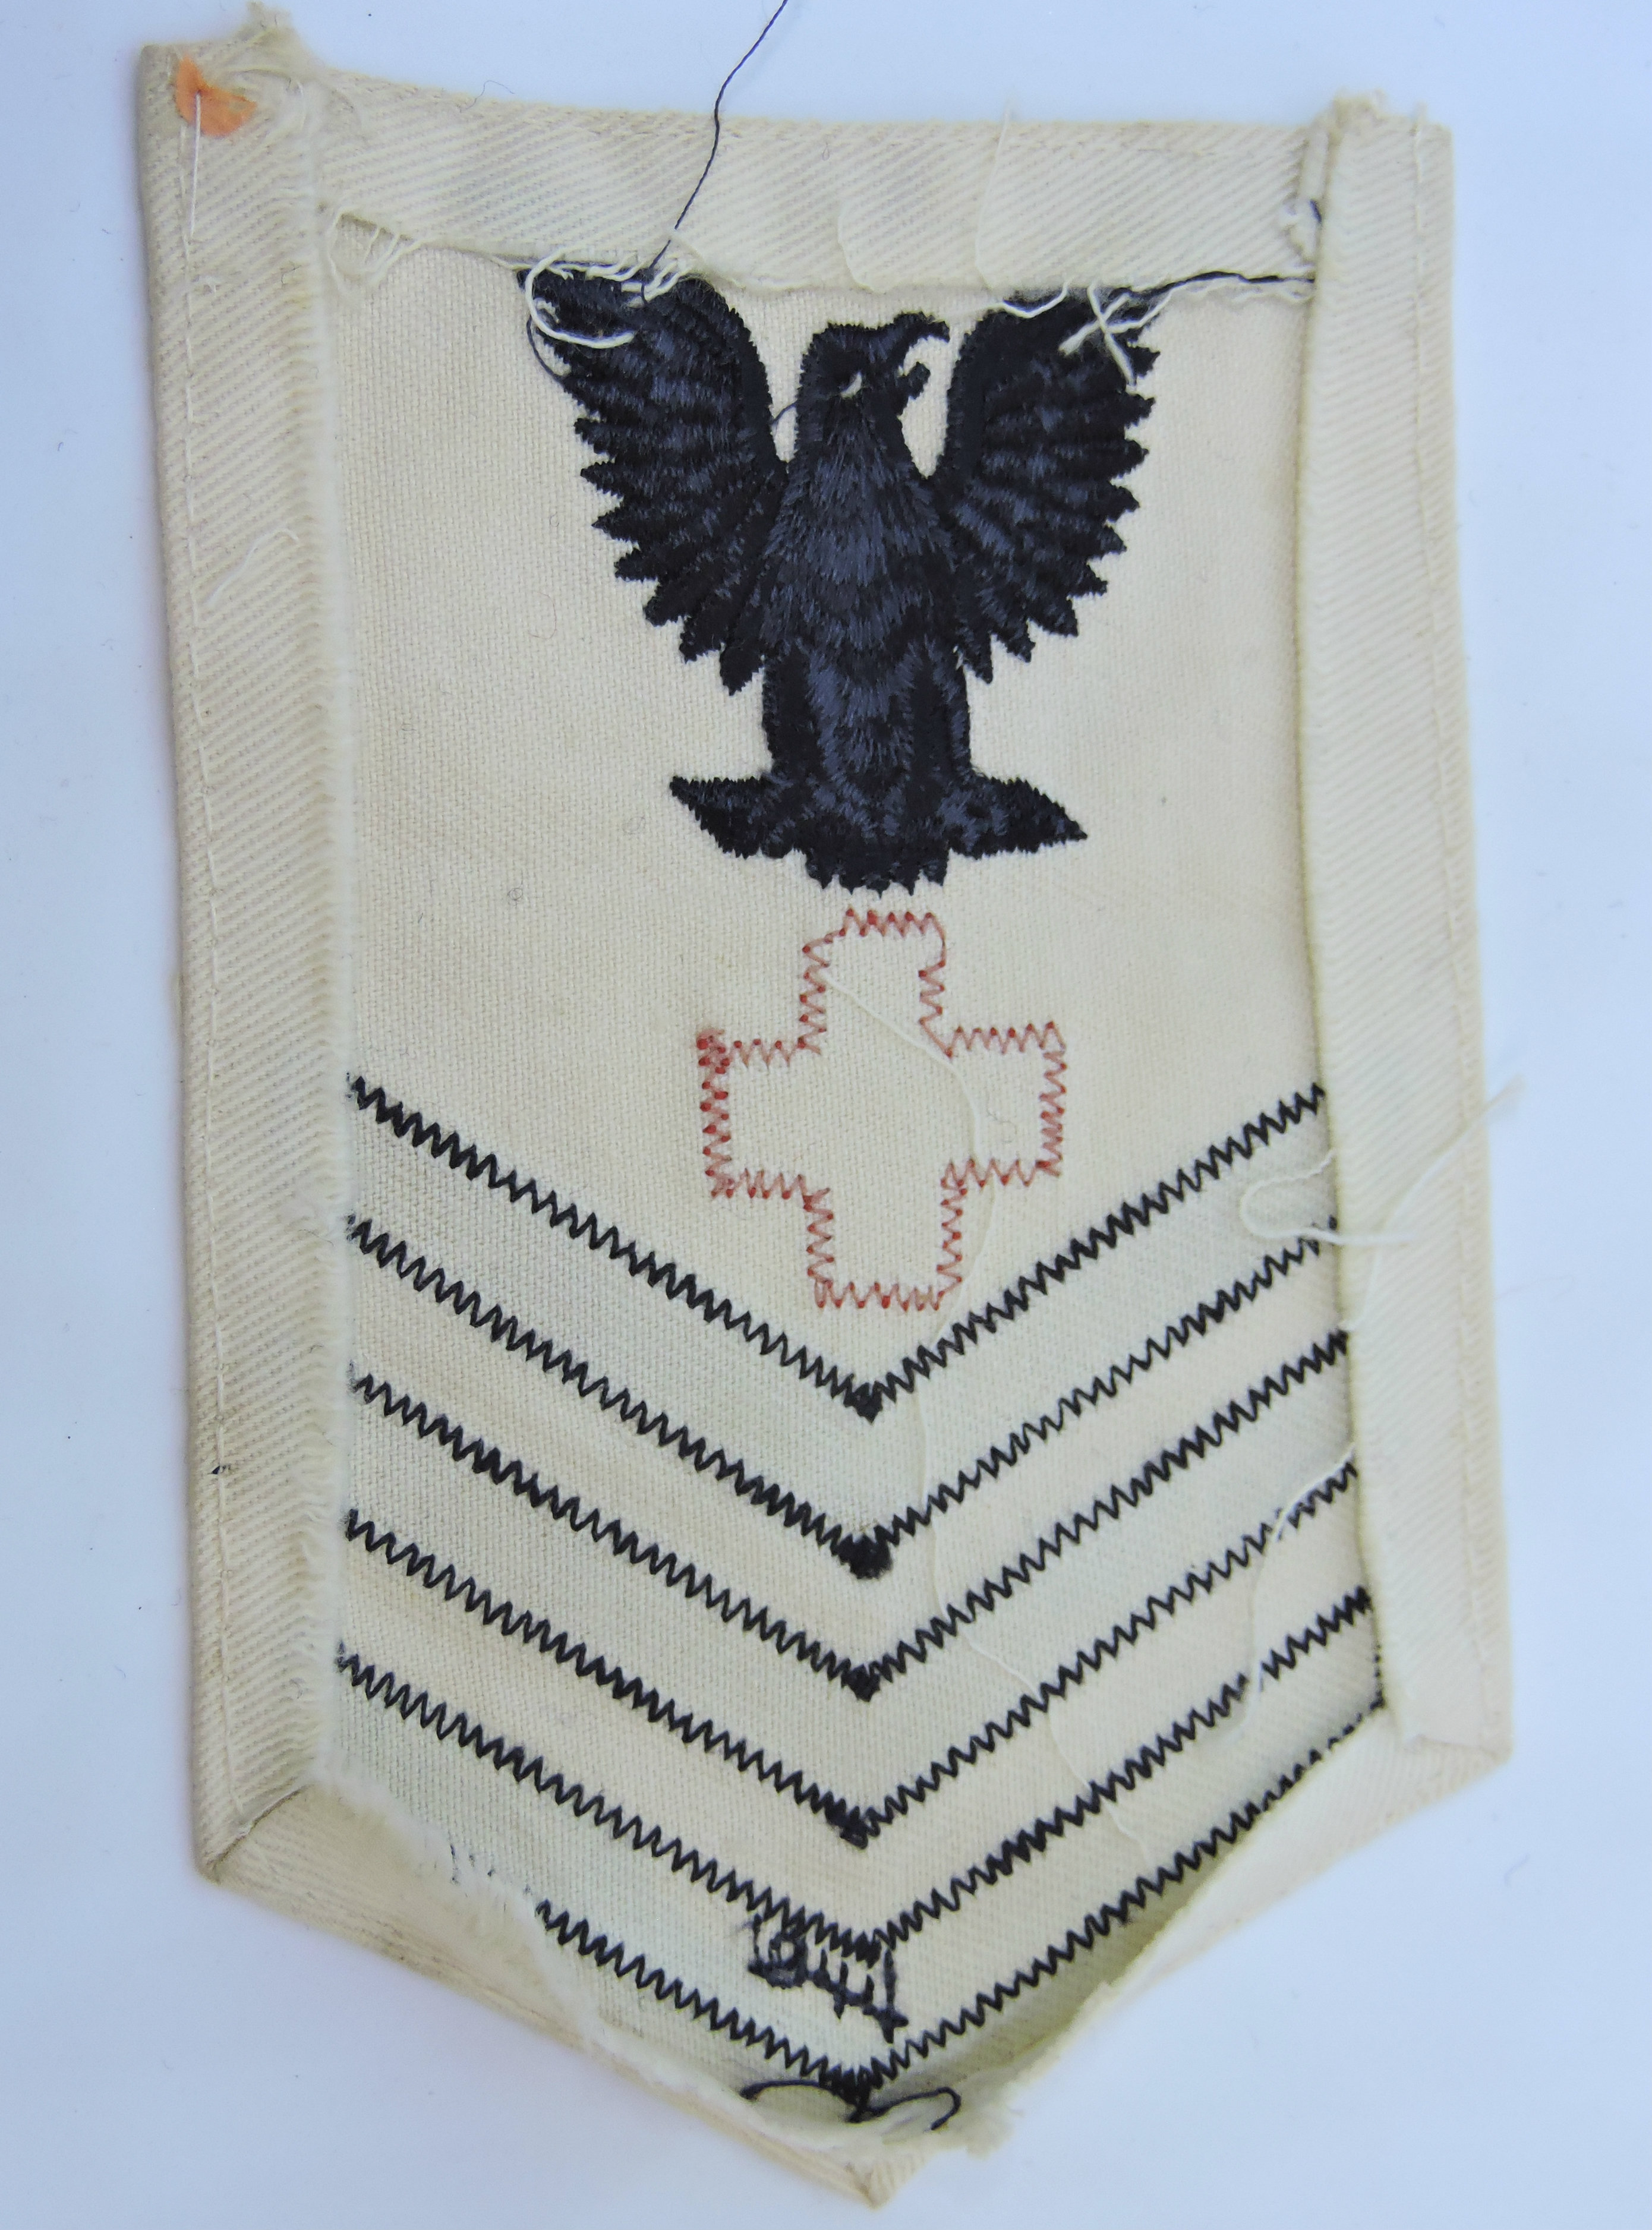 Sleeve rate USN Petty Officer 1st class Pharmacist&#039;s mate 1944